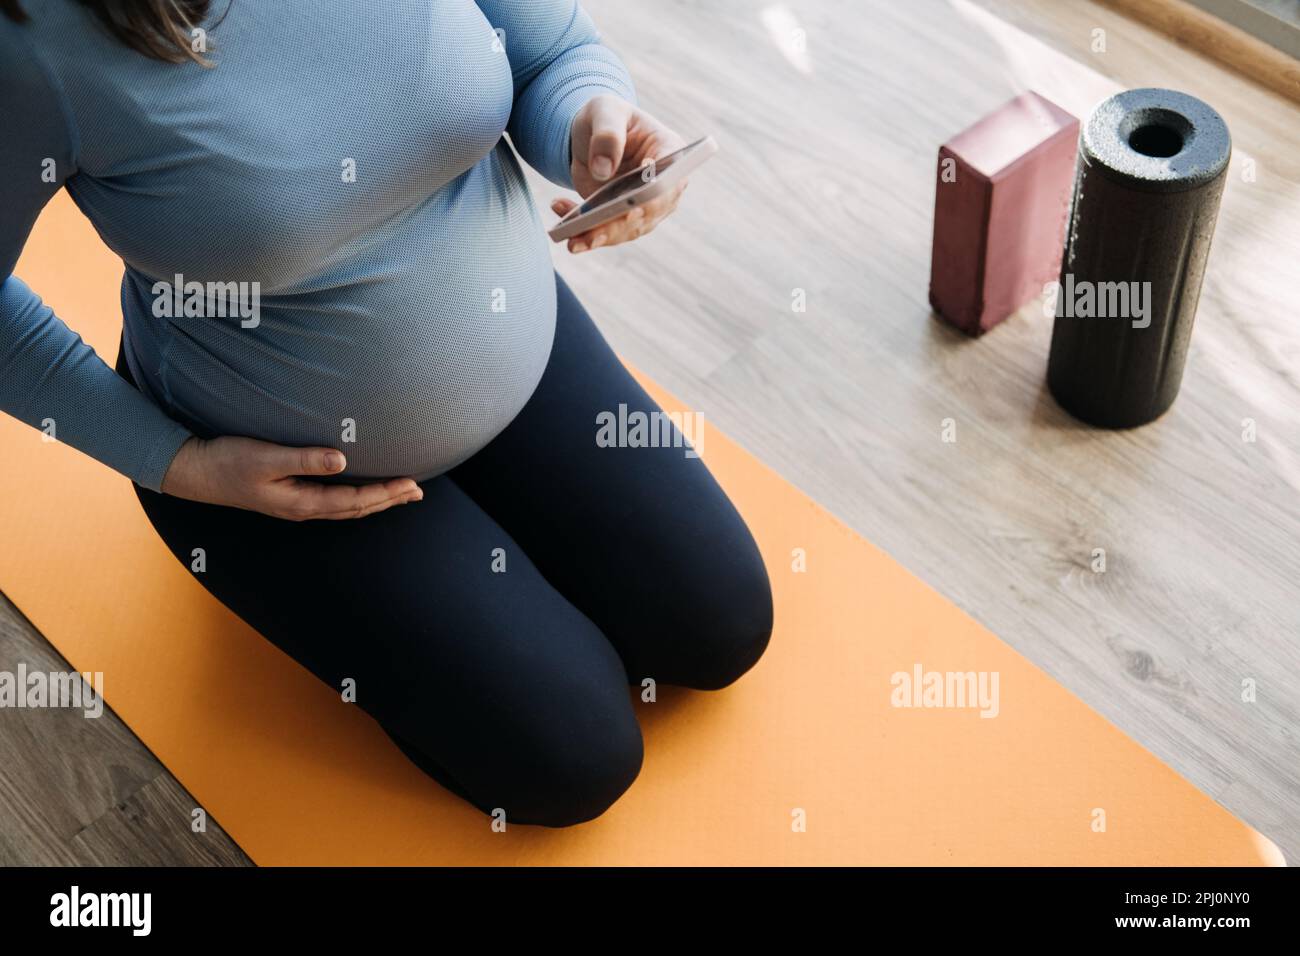 Postnatal exercise - Stock Image - C052/0563 - Science Photo Library